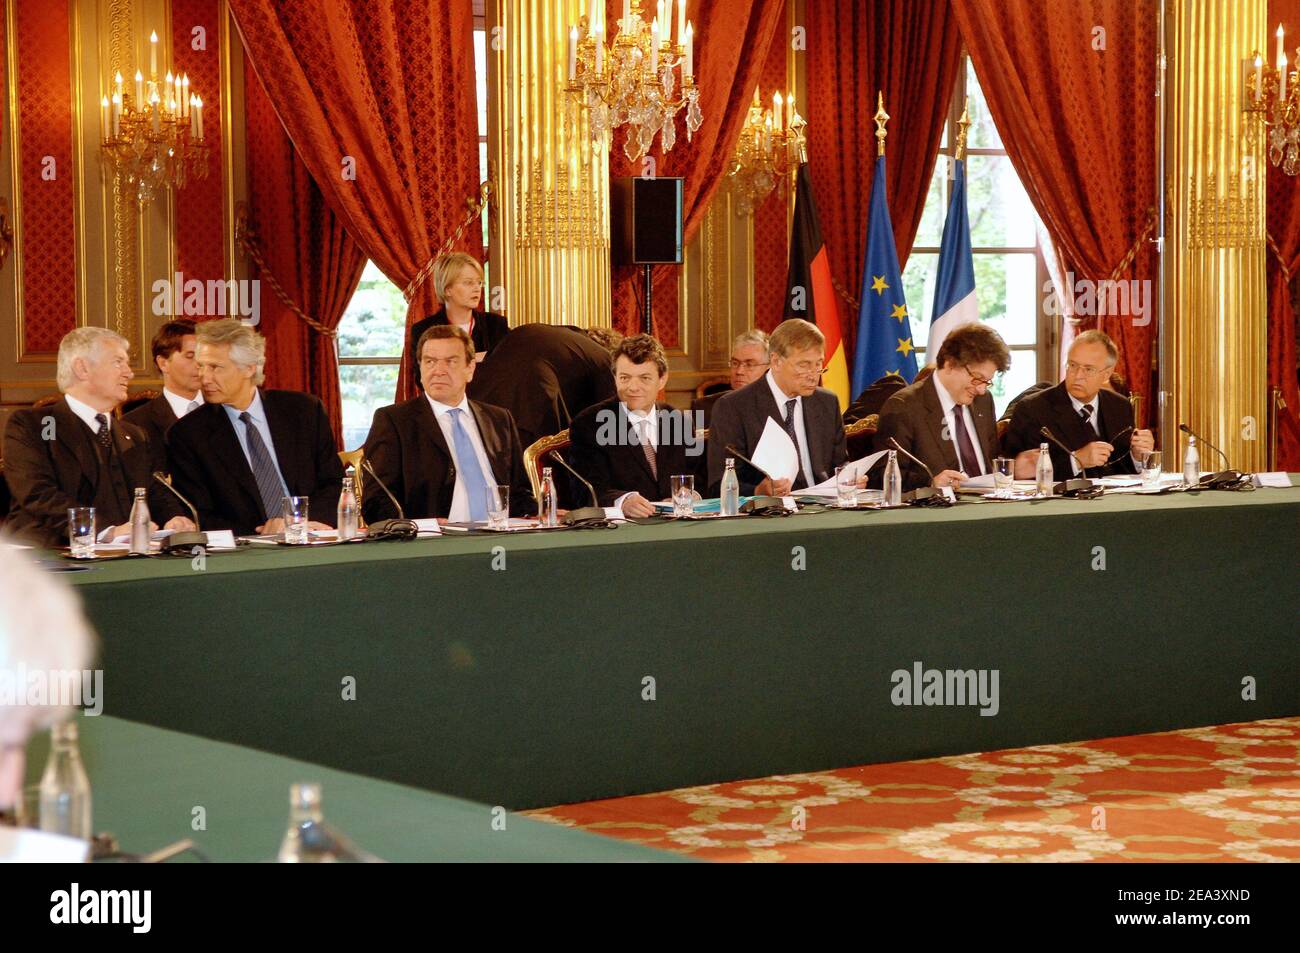 German interior minister Otto Schilly, interior minister Dominique de Villepin, Gerard Schroeder, Jean-Louis Borloo, German economy minister Wolfgang Clement, French finances minister Thierry Breton and German finances minister Hans Eichel during a Joint meeting of the French and German cabinets to discuss economic cooperation and the European Union constitution as polls overwhelmingly show the French could reject the treaty at the Elysee Palace in Paris Tuesday, April 26, 2005. Photo by Giancarlo Gorassini/ABACA. Stock Photo